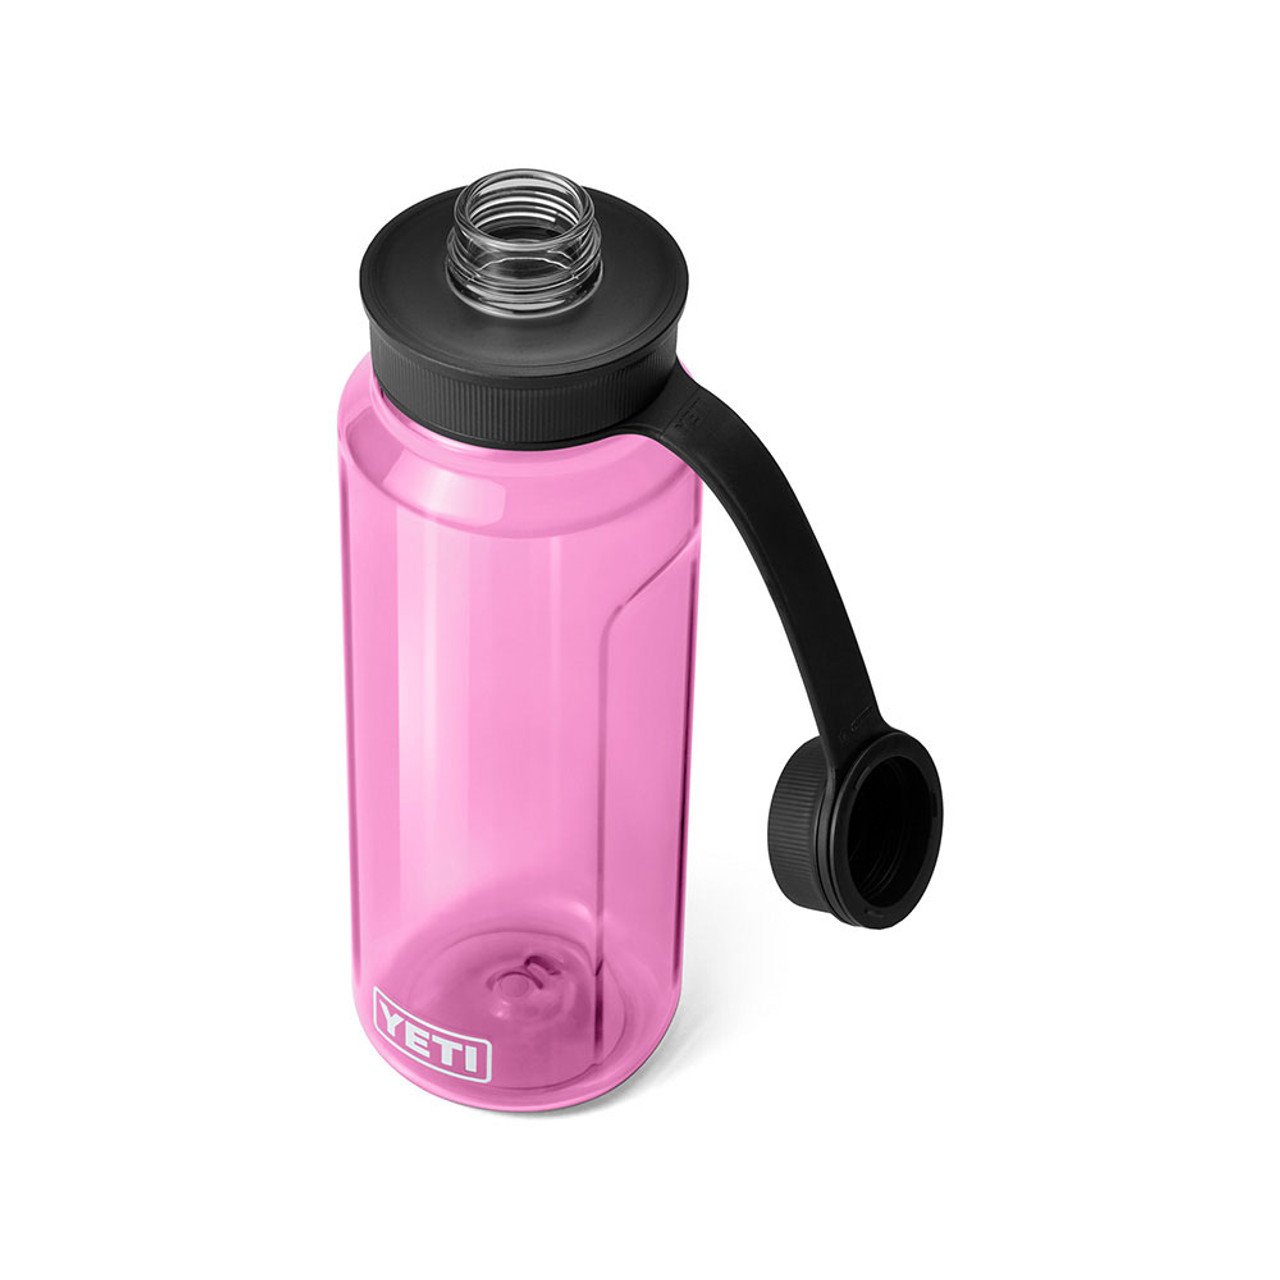 Yeti Yonder 1 L/34 Oz Water Bottle with Chug Cap Power Pink 21071502075  from Yeti - Acme Tools